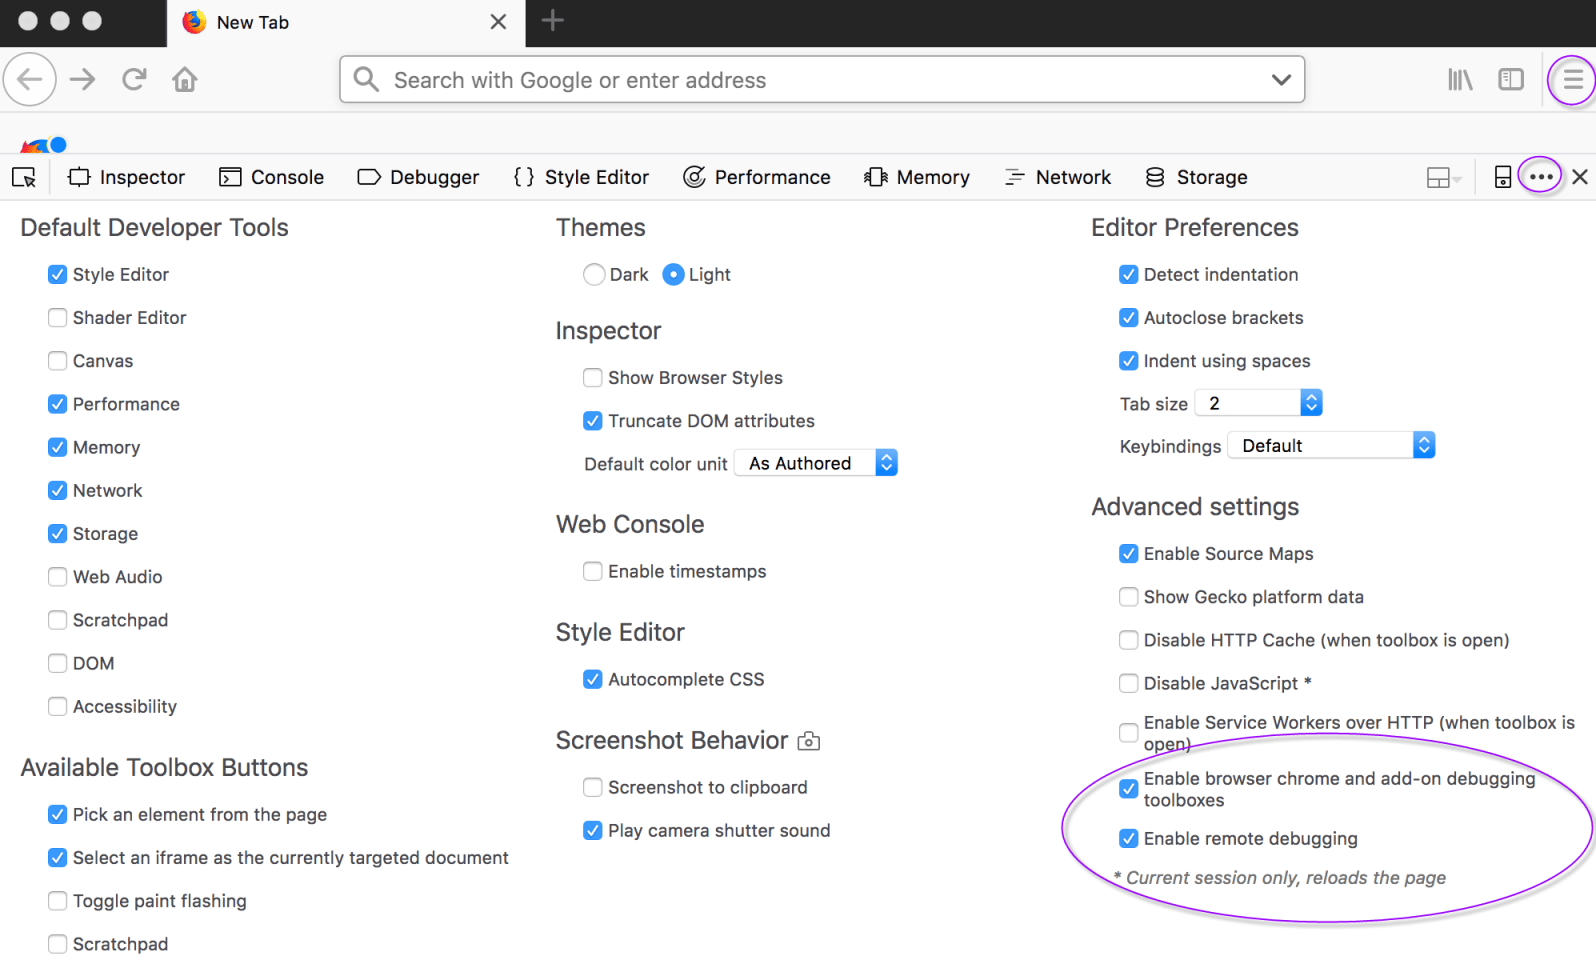 Selecting the Enable remote debugging and Enable browser chrome add-on debugging checkboxes